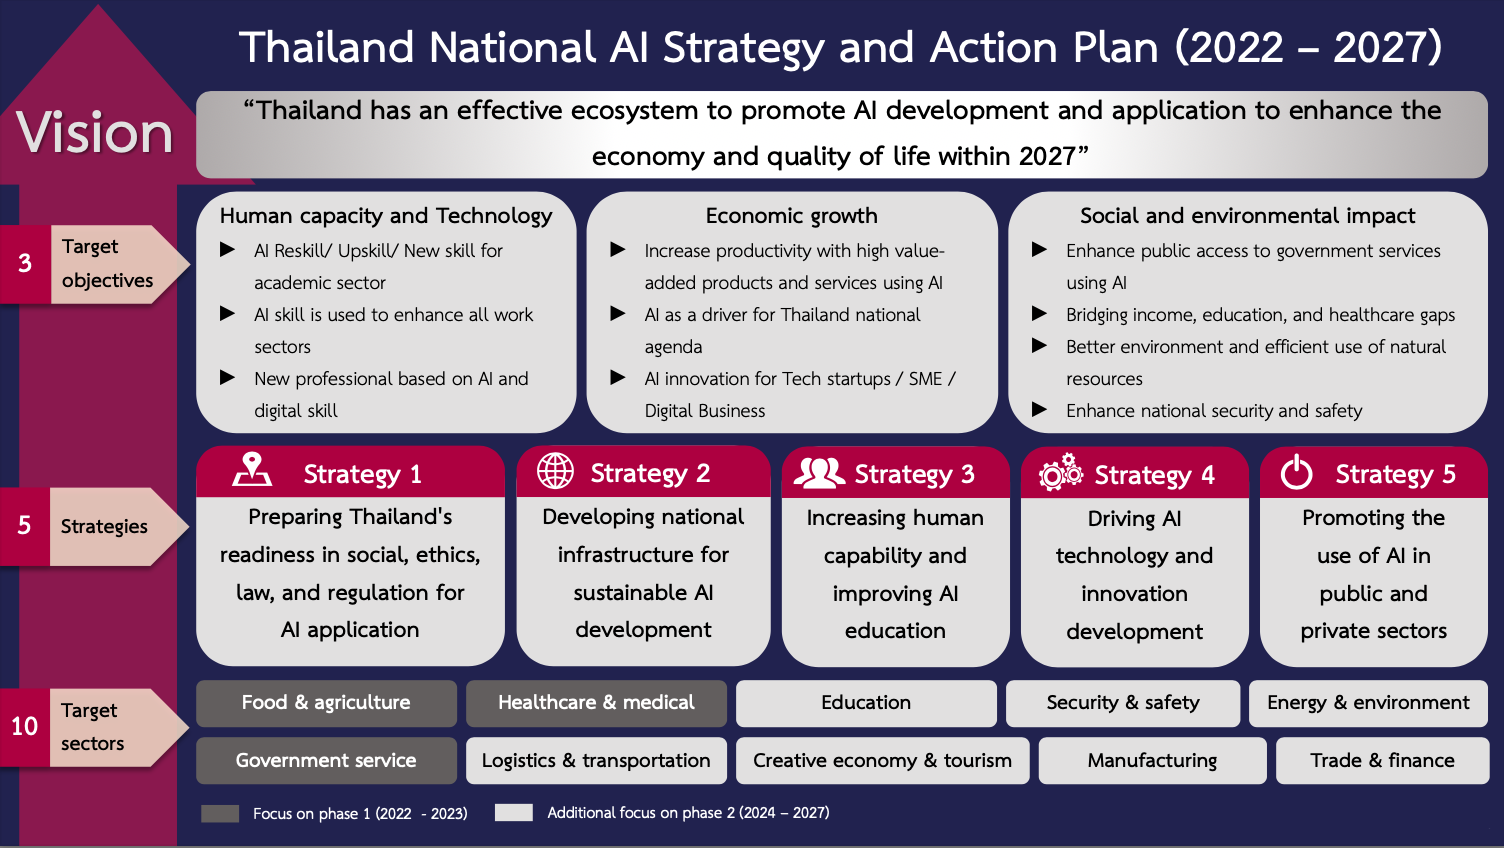 Thailand National AI Strategy and Action Plan 2022-2027 (Credit / Source: AI Thailand / NECTEC)